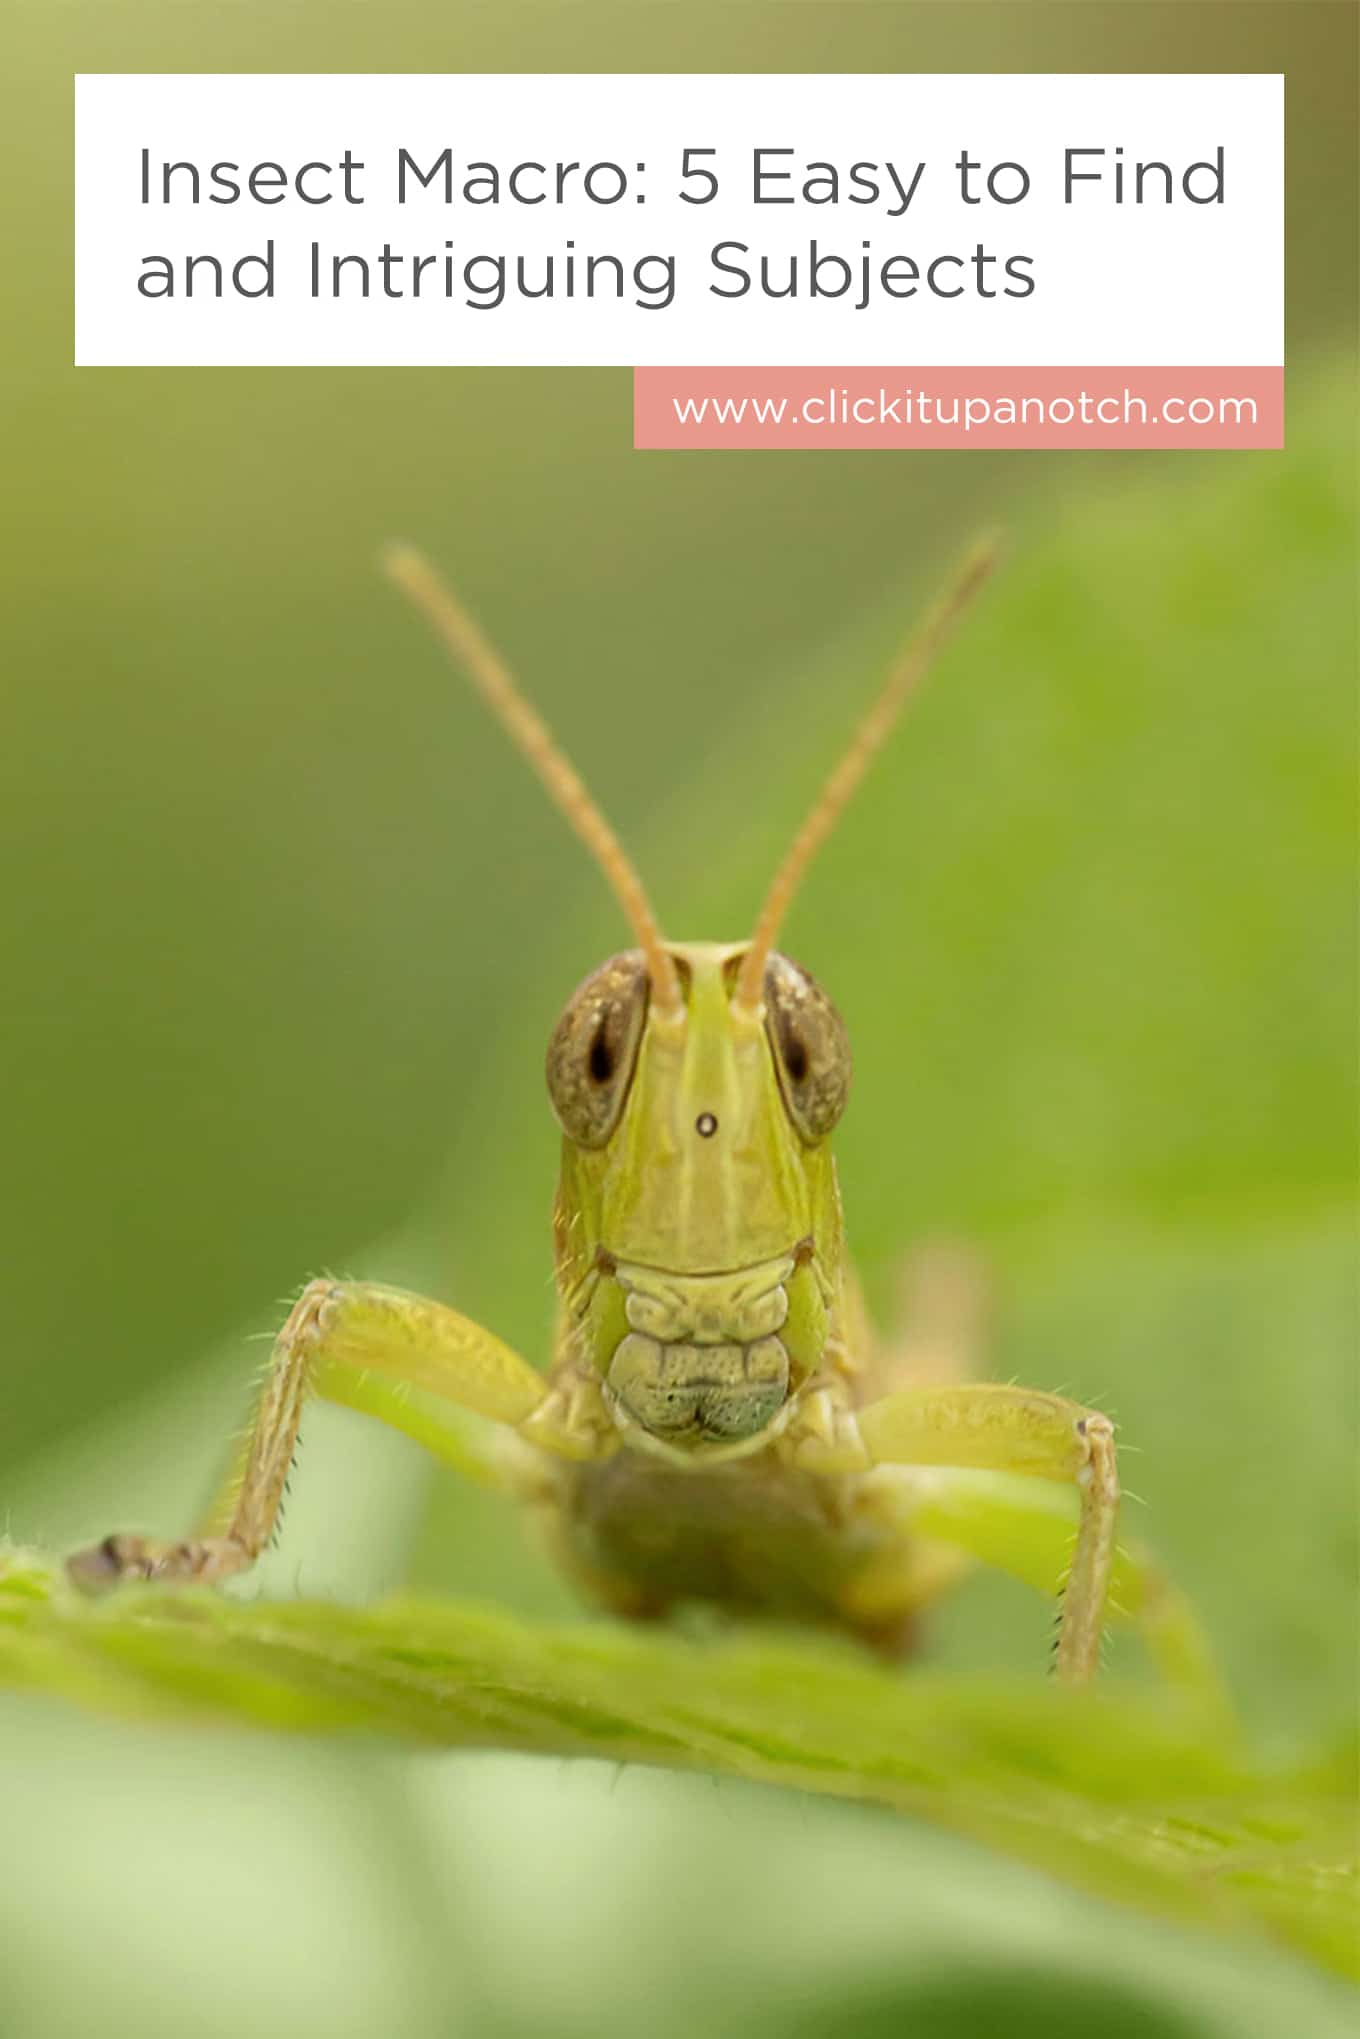 I love that she gave tips for each insect. I'm going to give it a try this weekend! Read - "Insect Macro: 5 Easy to Find and Intriguing Subjects"